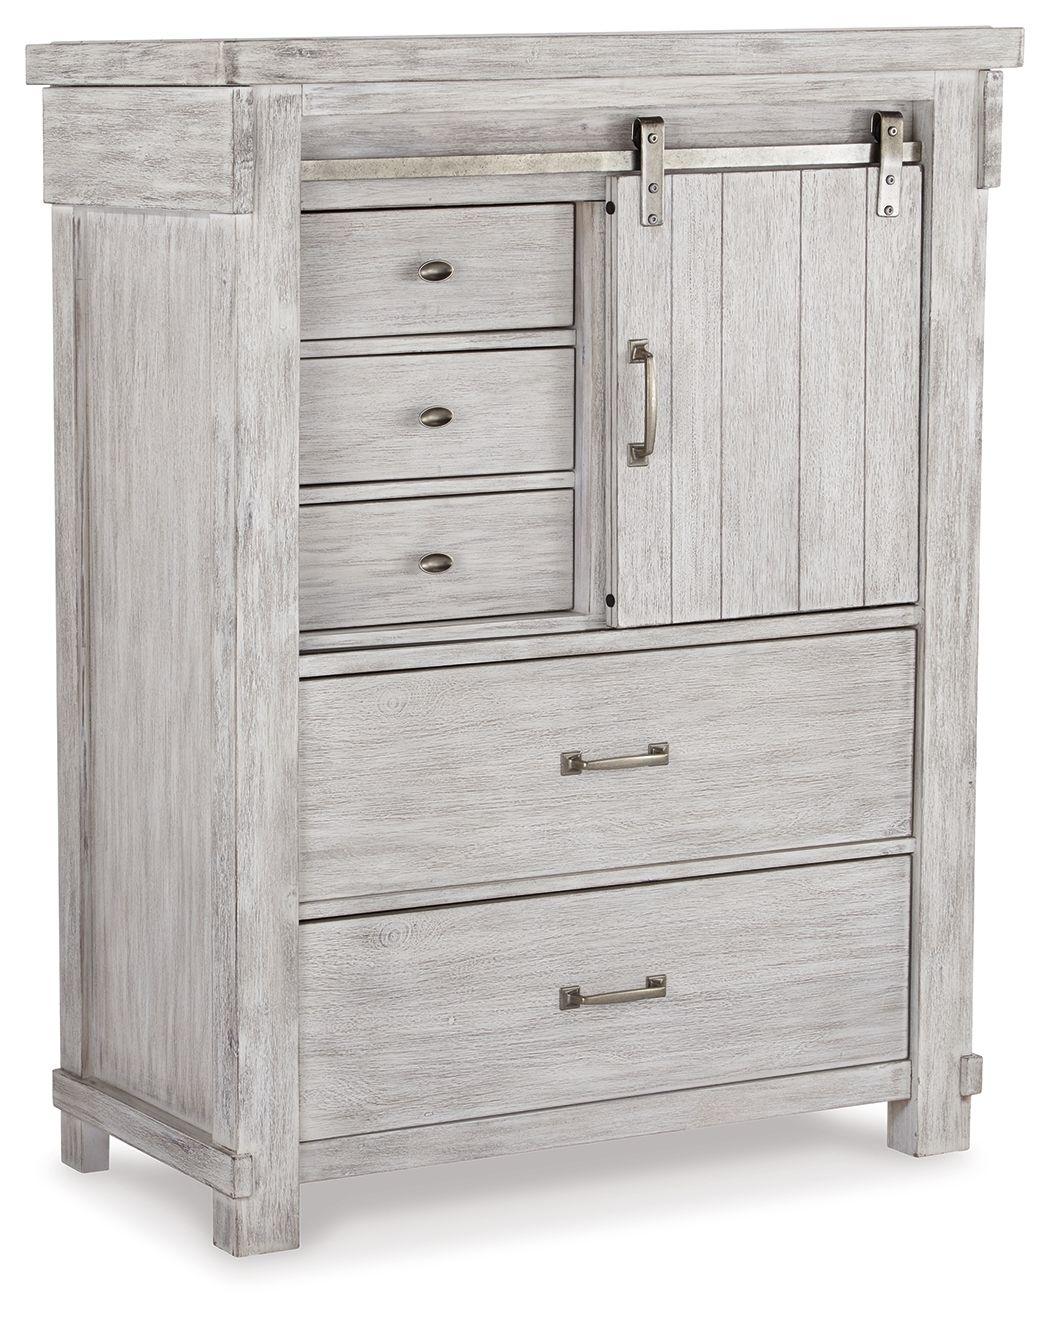 Brashland - White - Five Drawer Chest - Distressed Finish Tony's Home Furnishings Furniture. Beds. Dressers. Sofas.